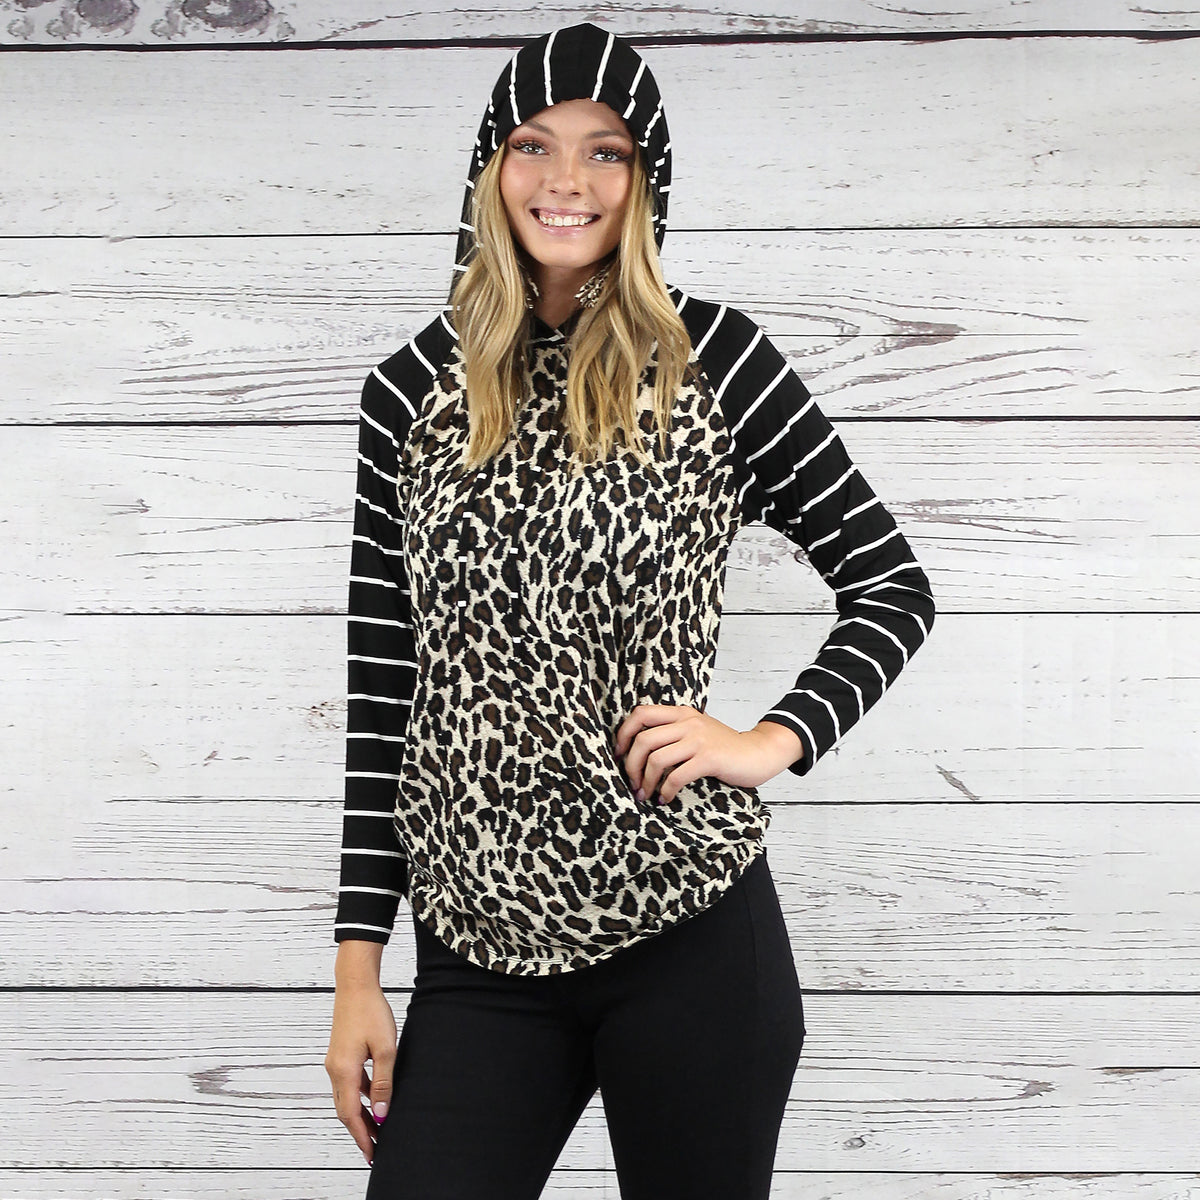 10481 - Striped Hoodie with Buffalo Plaid Print Top - Leopard